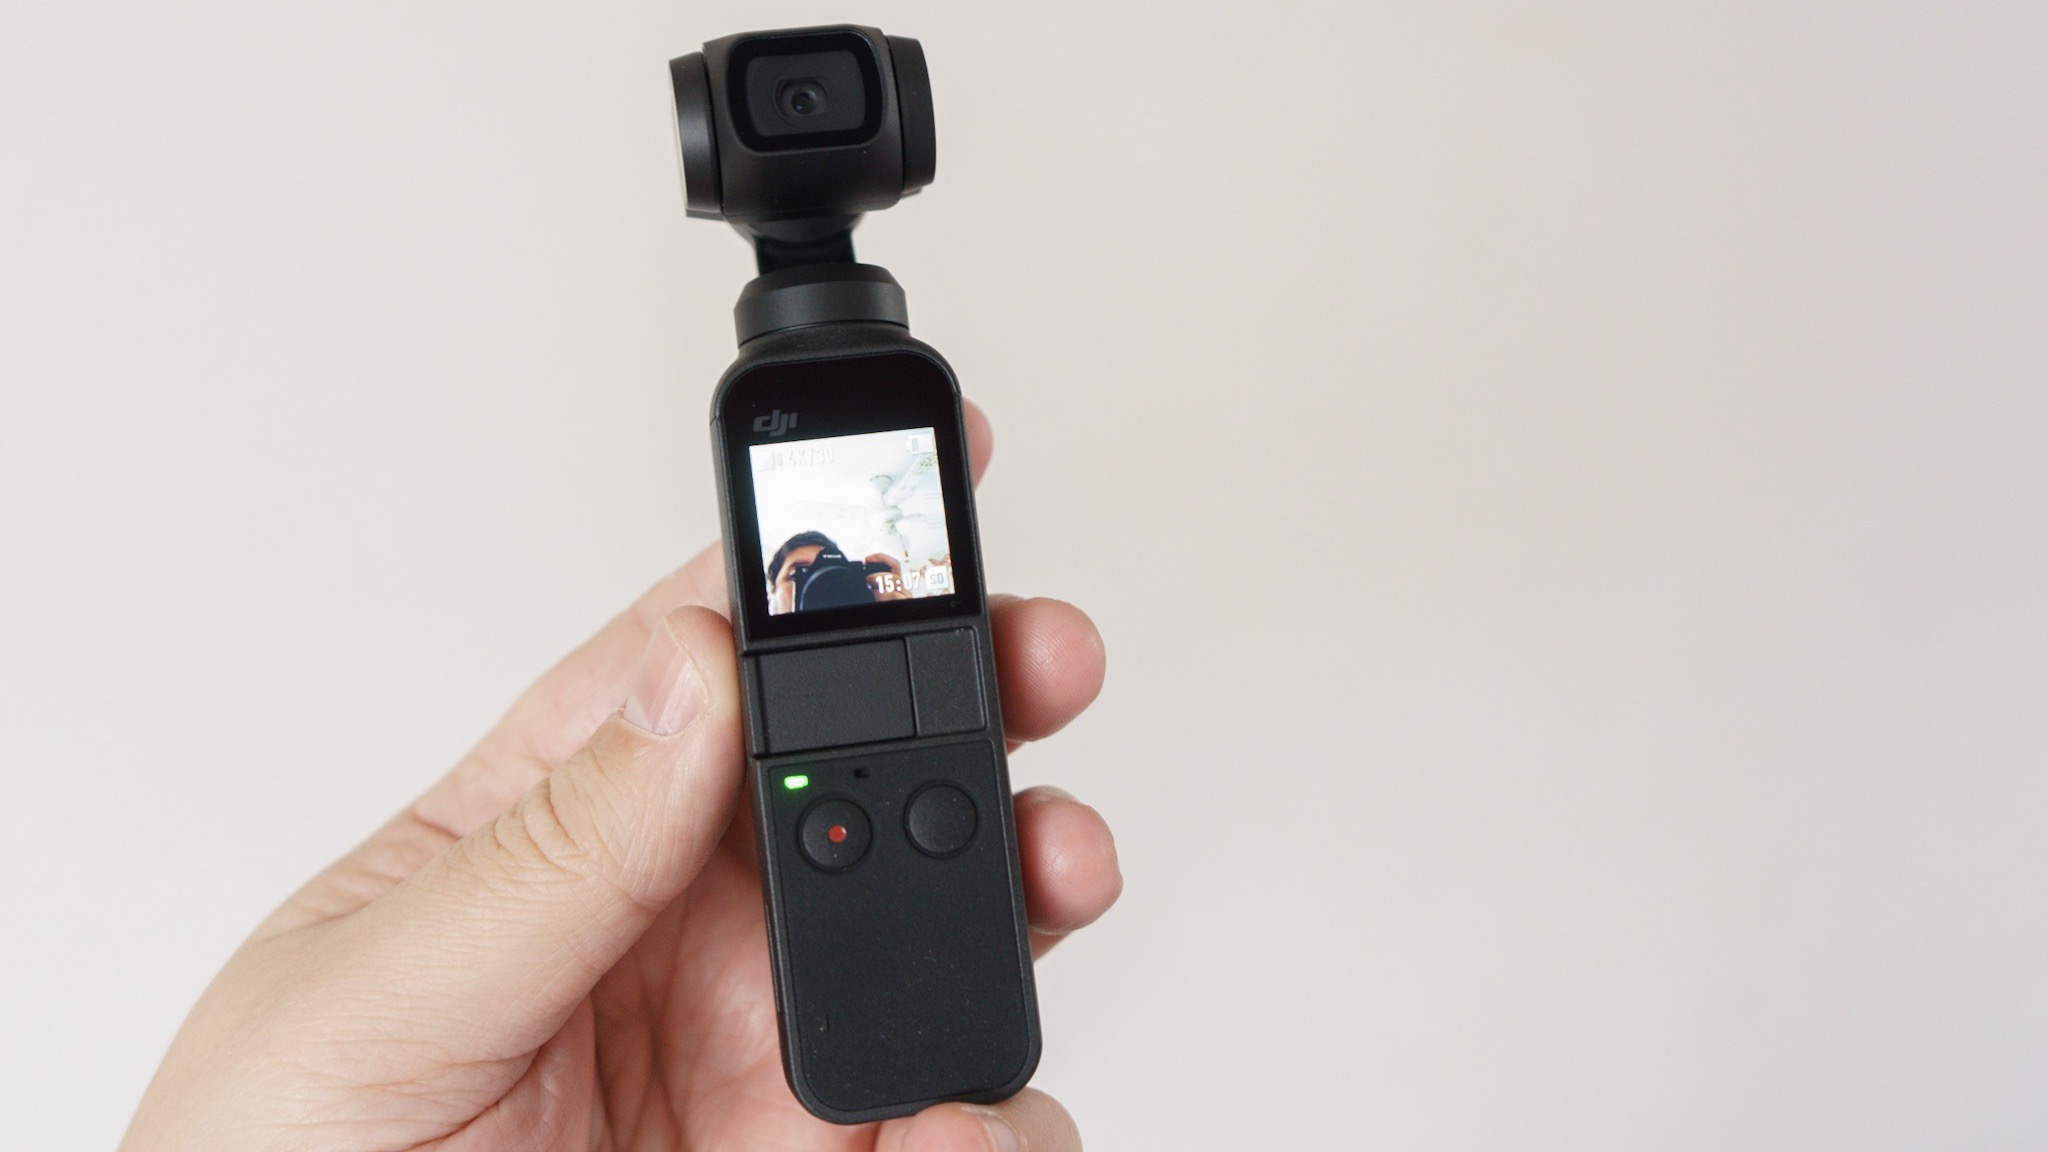 How to Set up Your Osmo Pocket in 2 Minutes - DJI Guides